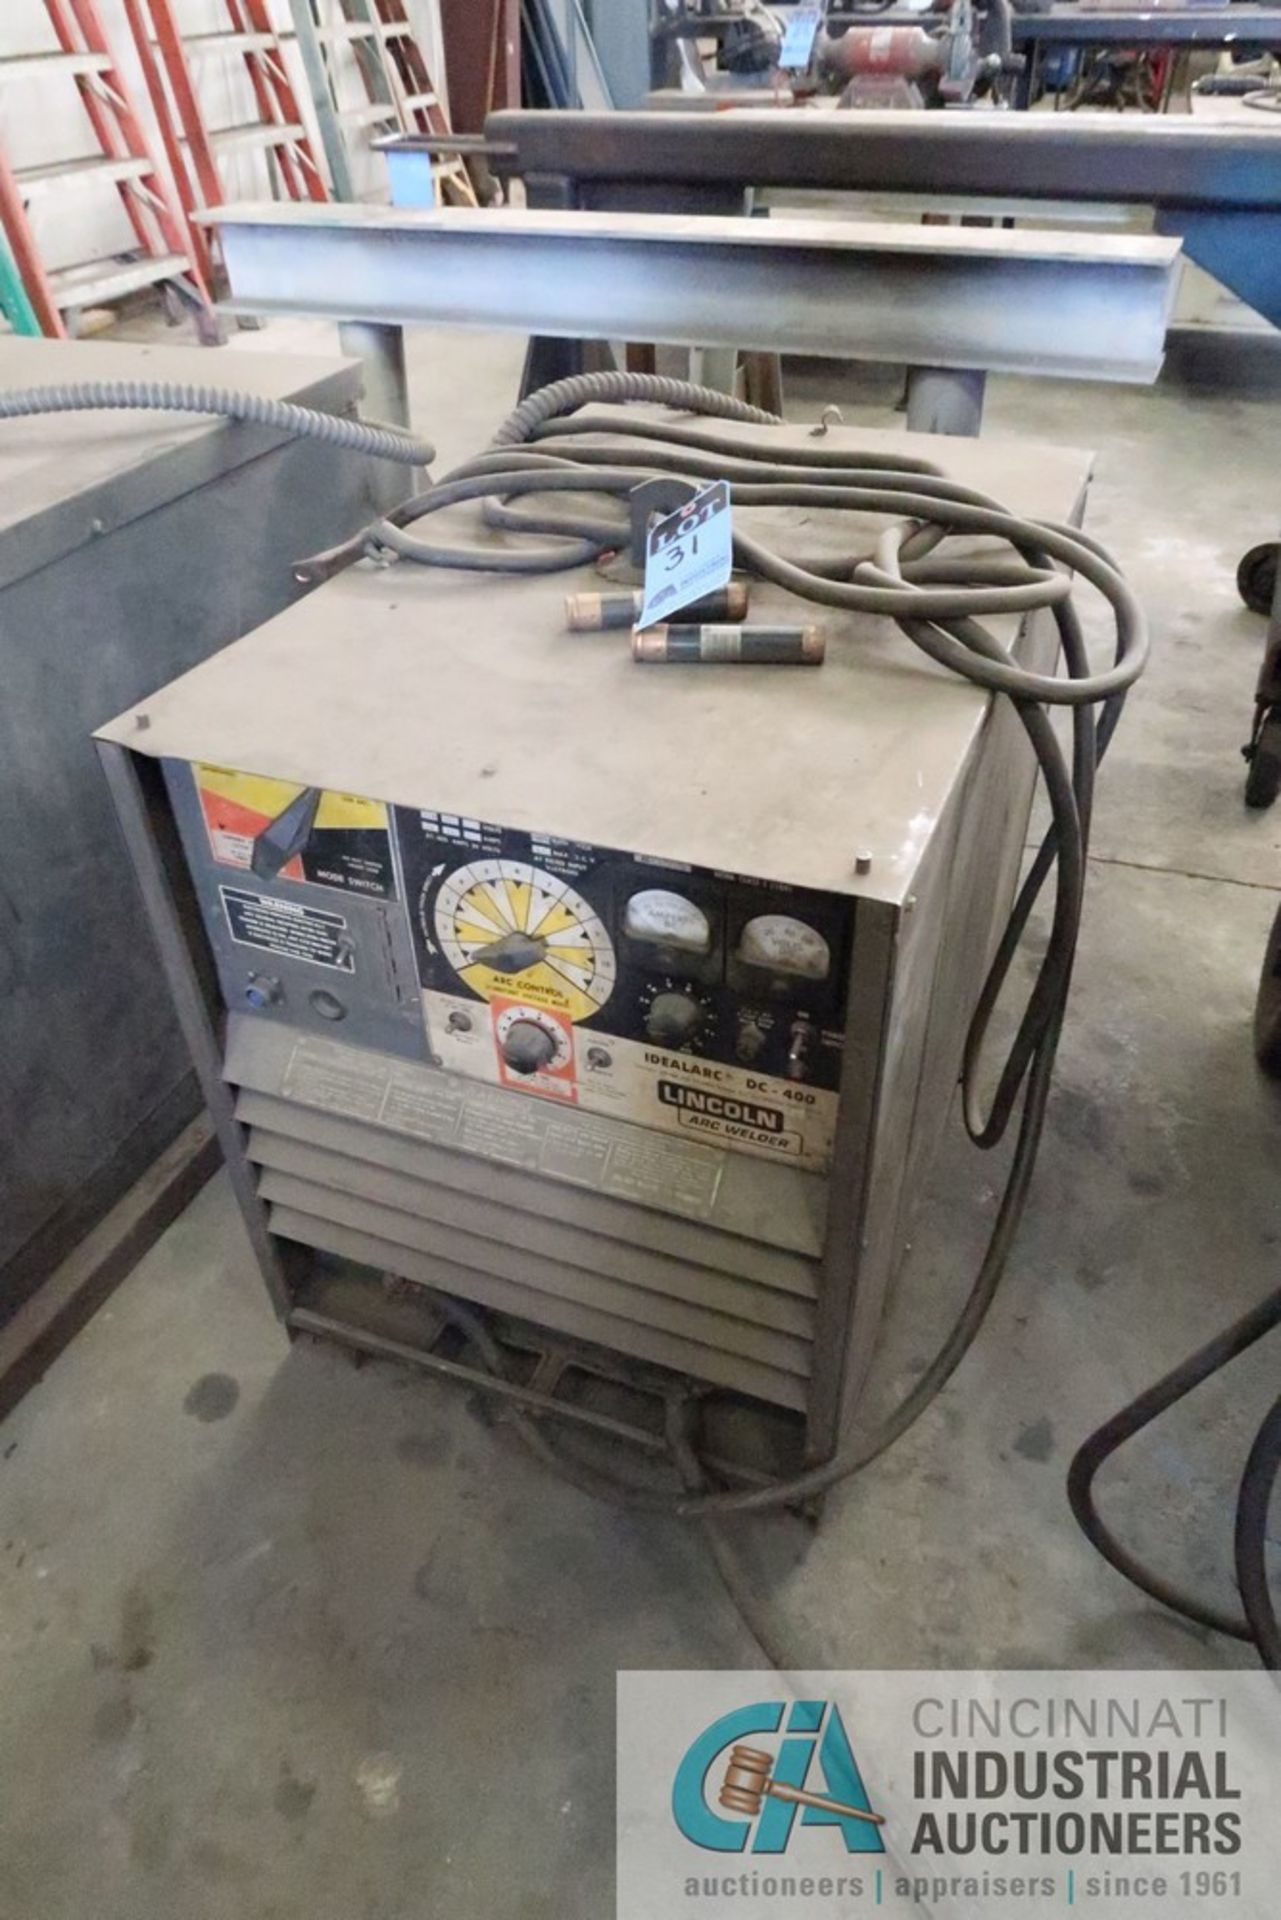 400 AMP LINCOLN ELECTRIC MODEL DC-400 ARC WELDING POWER SOURCE